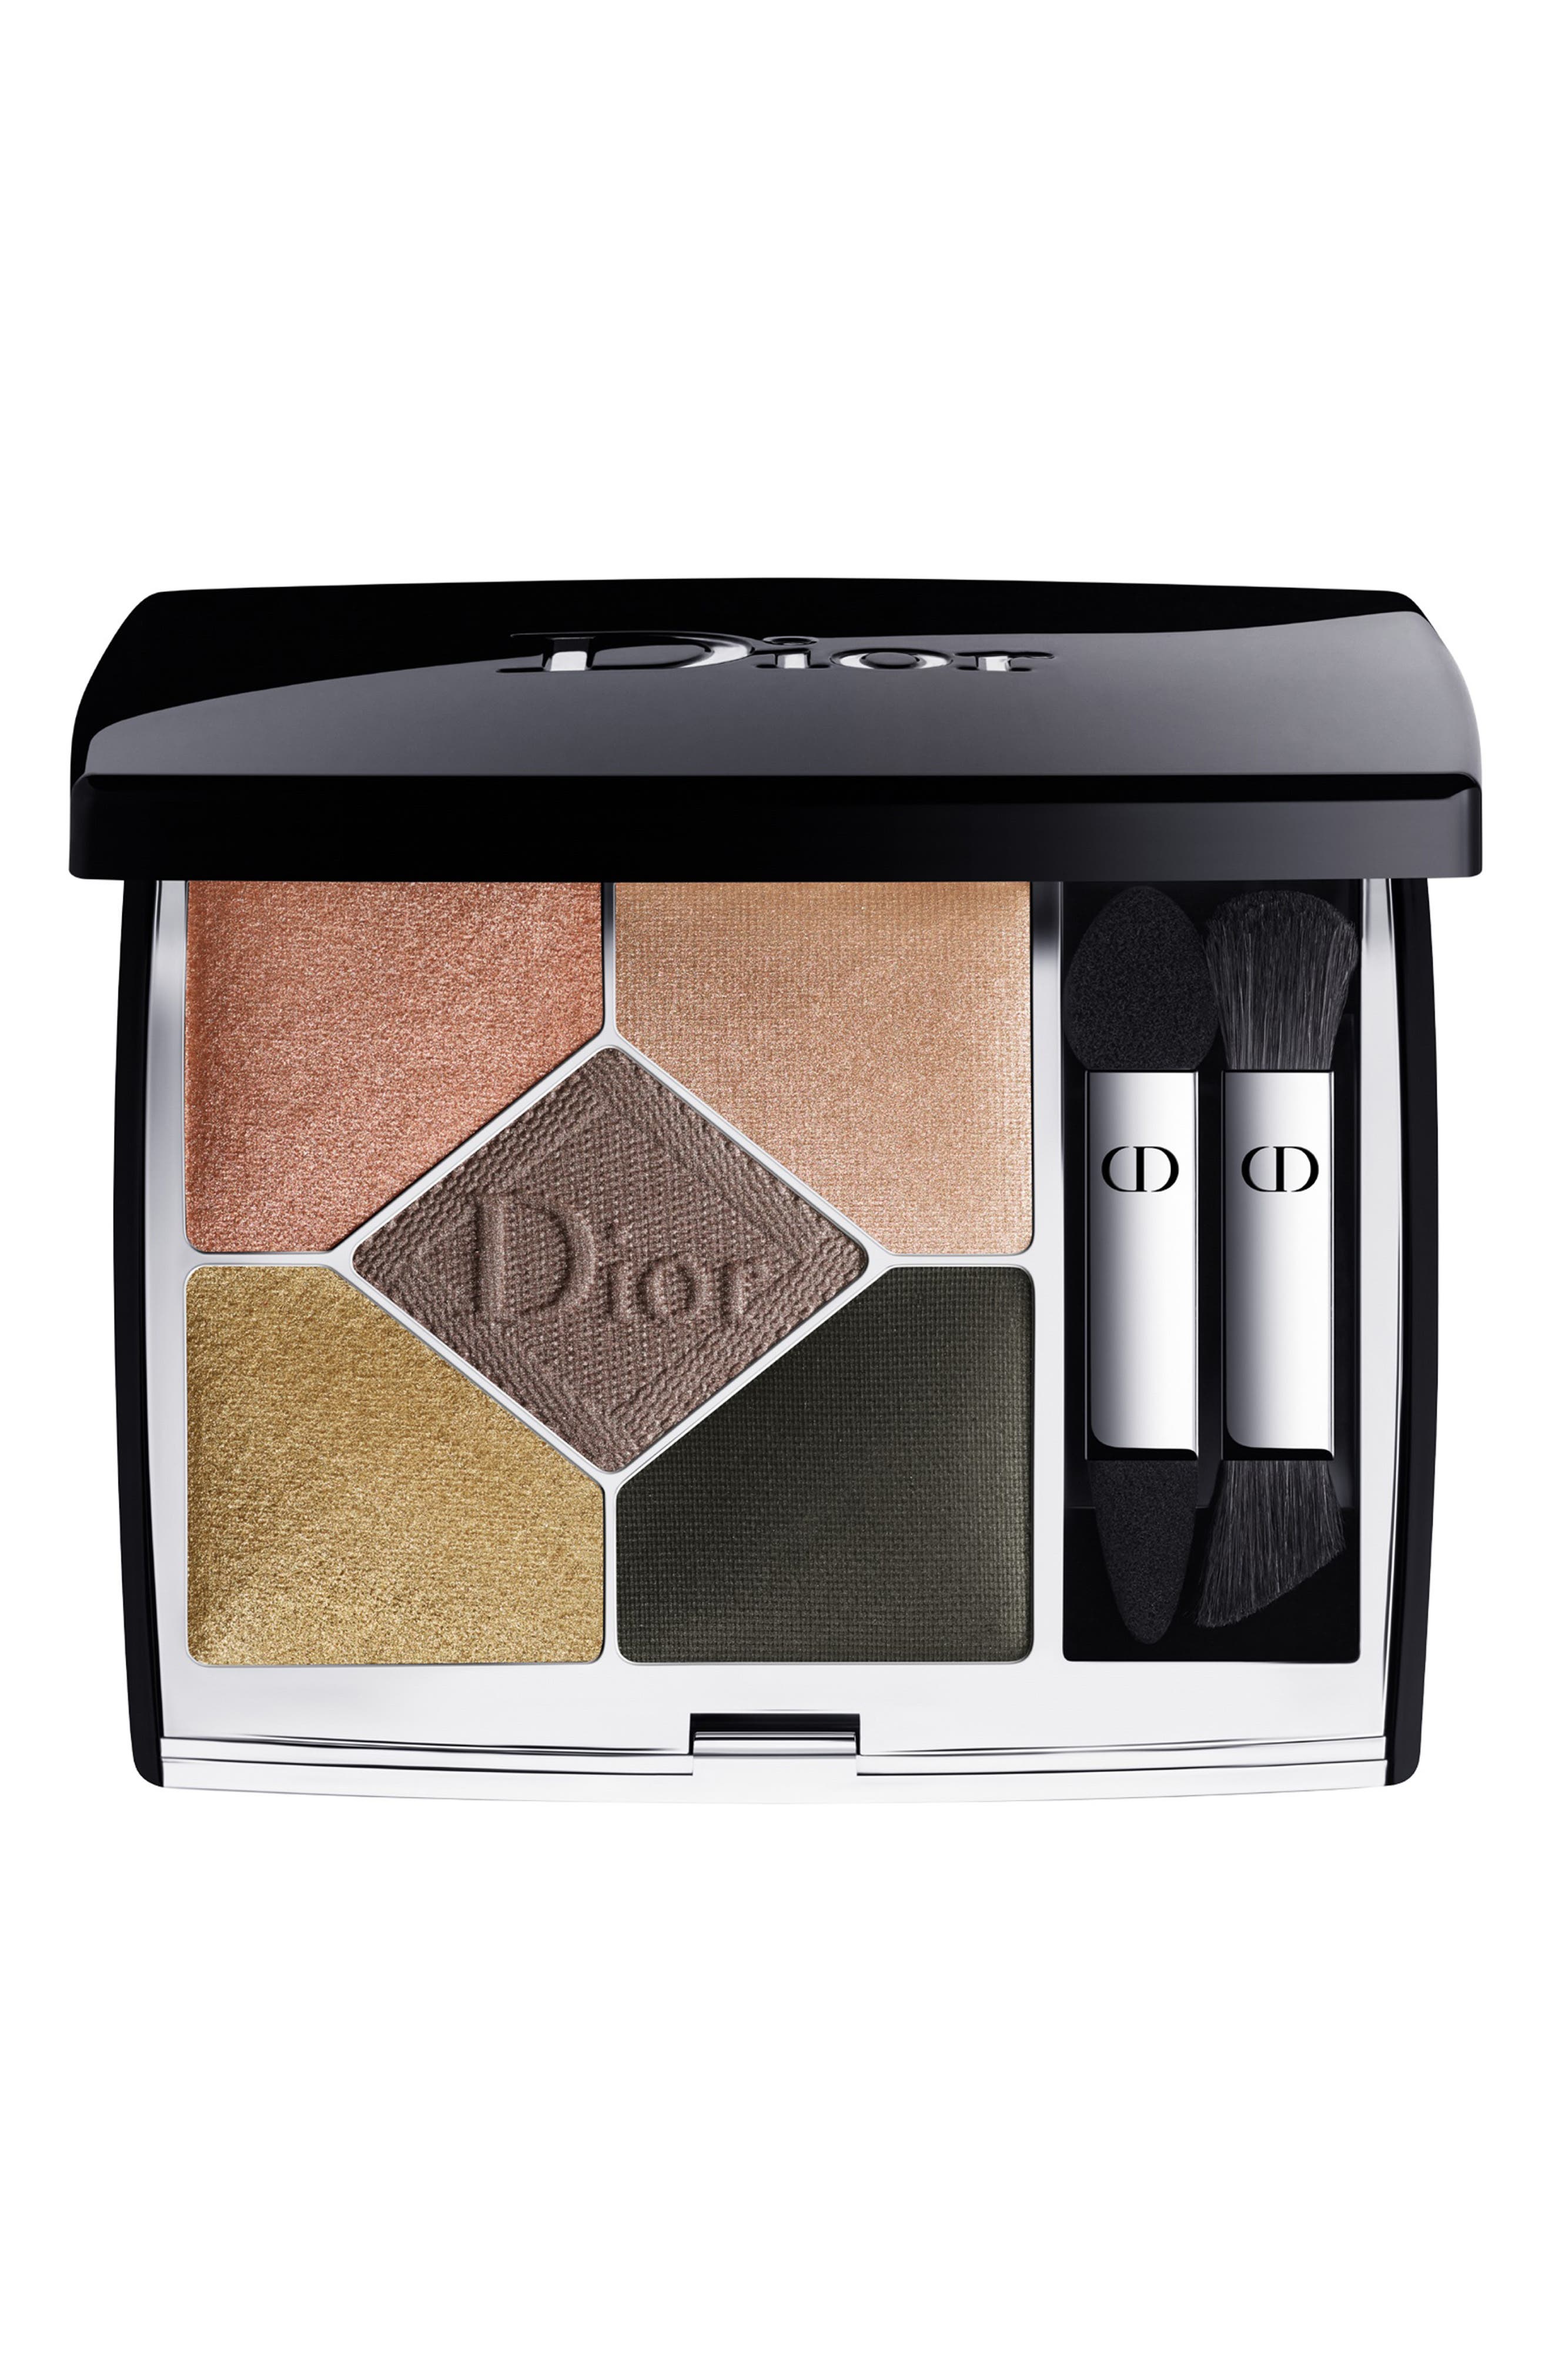 Dior 5 Couleurs Couture Eyeshadow Palette in 579 Jungle